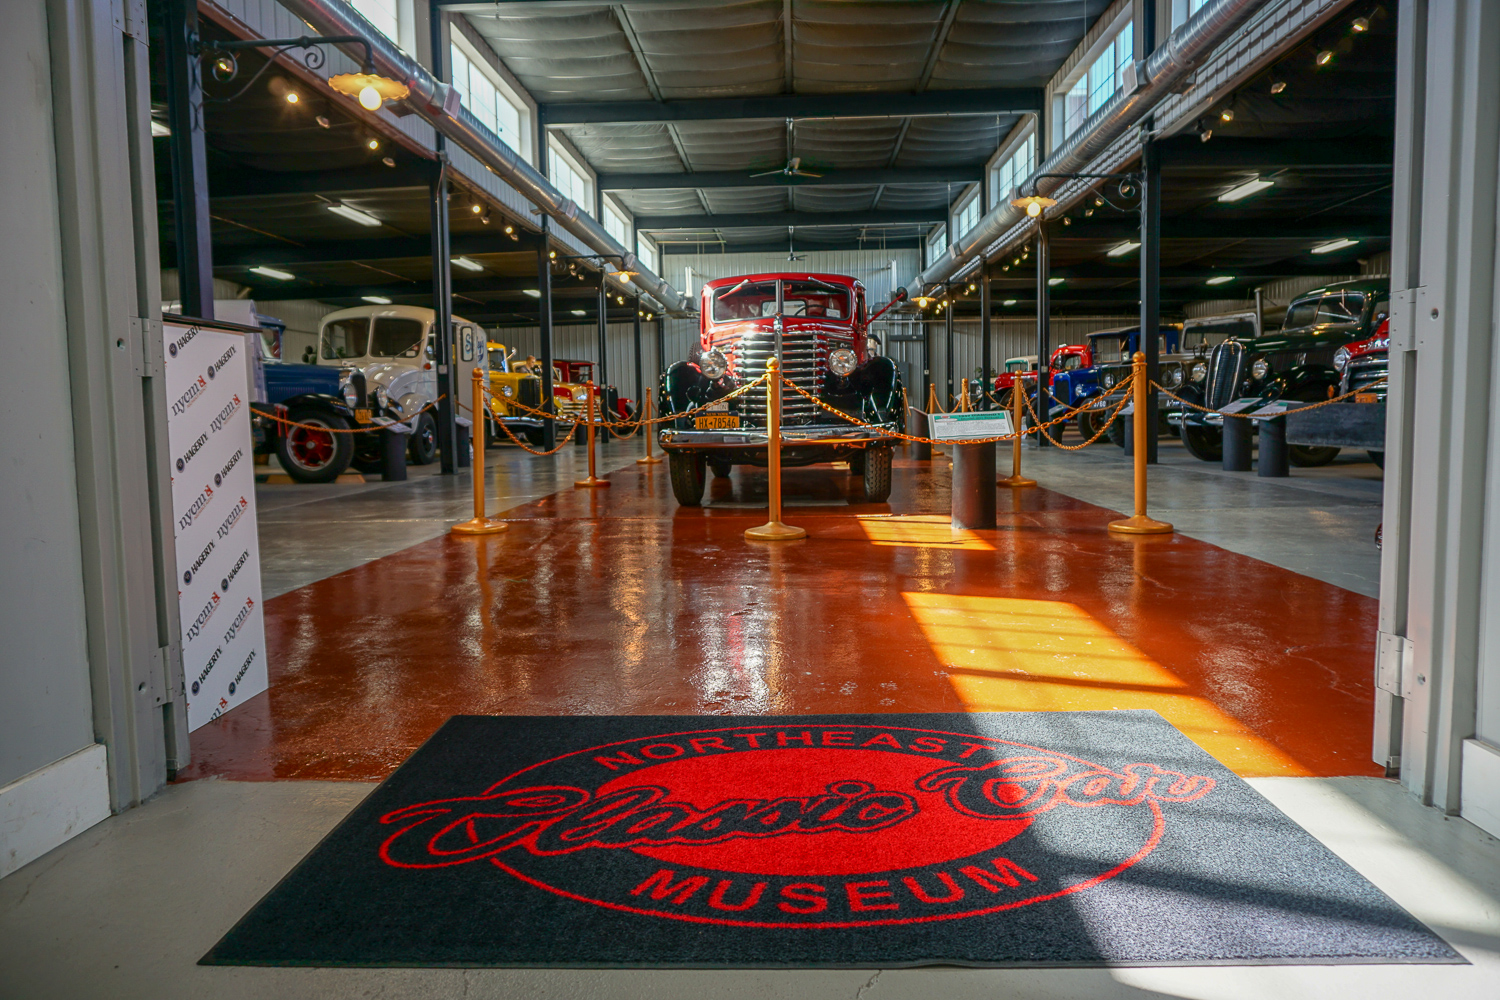 The Northeast Classic Car Museum of Norwich, New York - Exploring Upstate